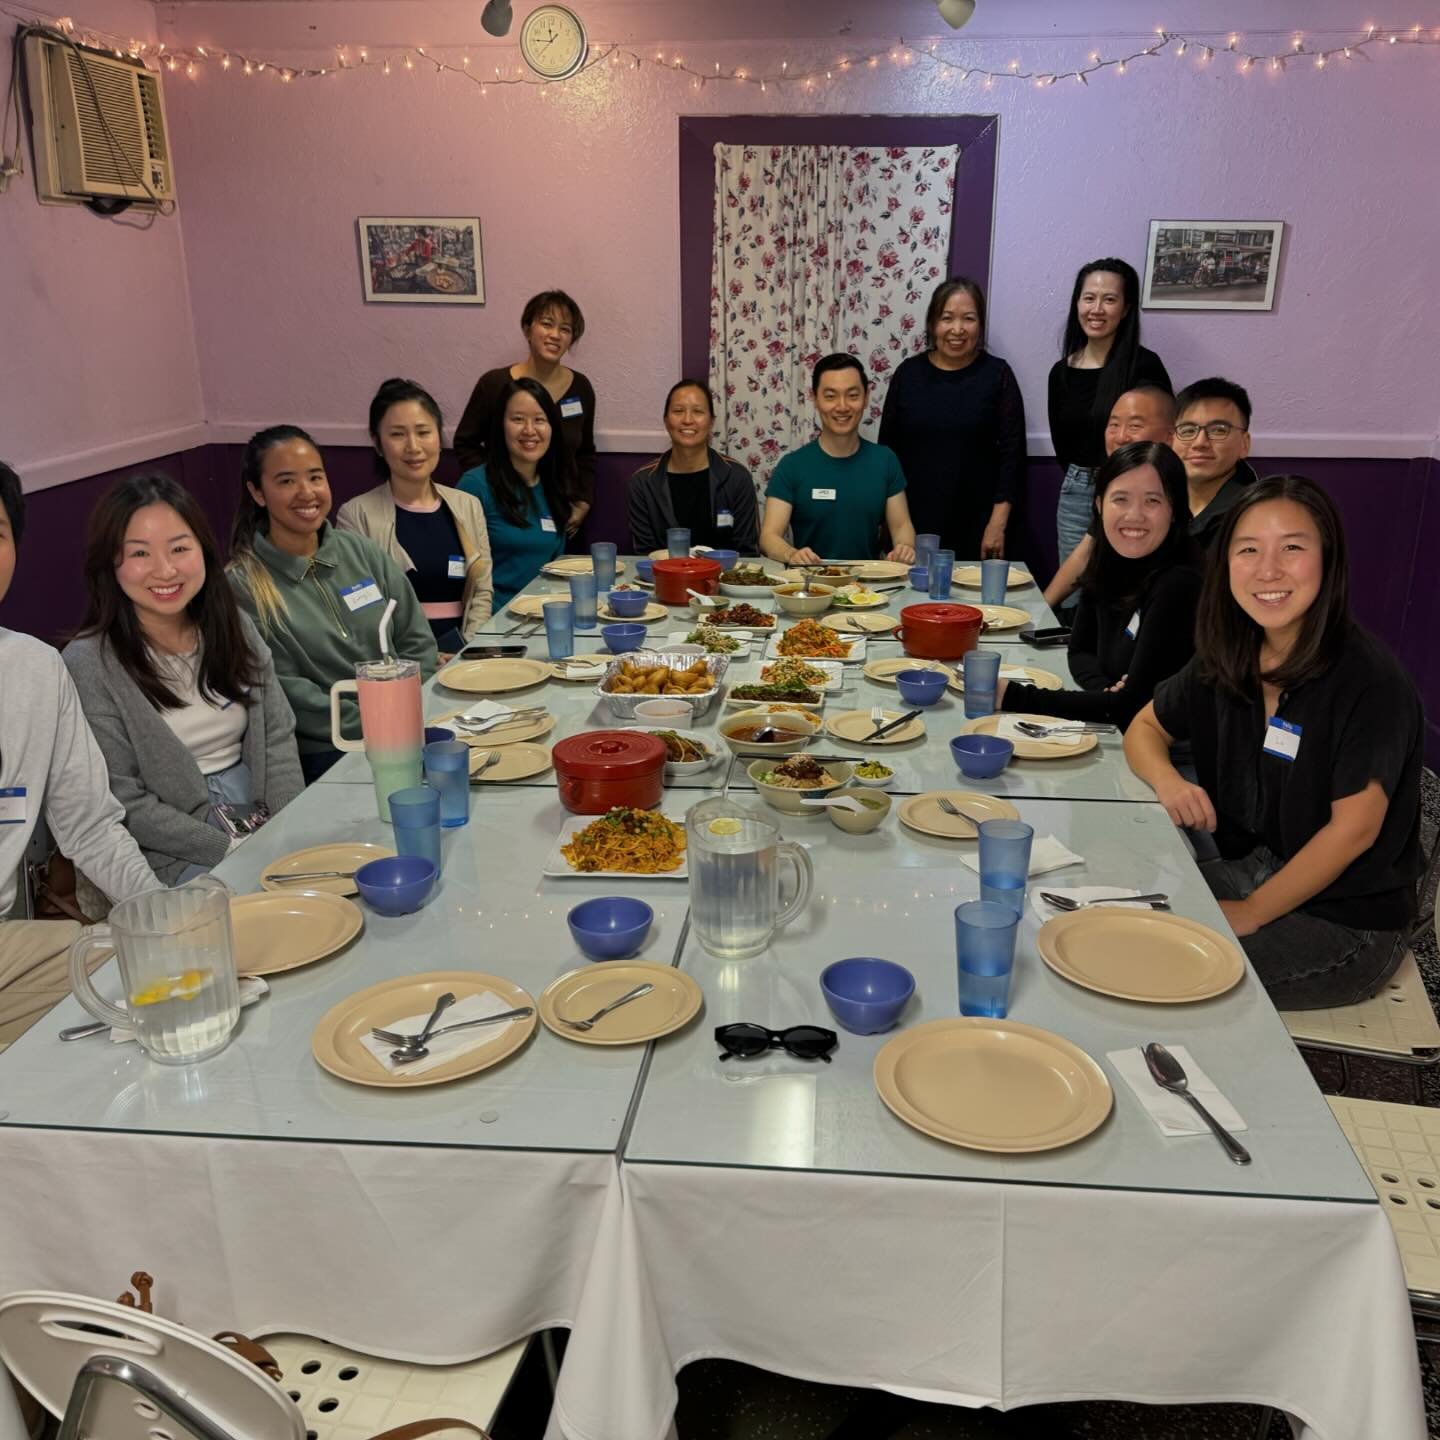 Our first restaurant in the Apex Dine &amp; Discover series was hugely successful! The food at Yoma Myanmar was a massive hit with the guests. We met the lovely owner, Joan, who shared her culinary journey. Her passion for Burmese cuisine and culture